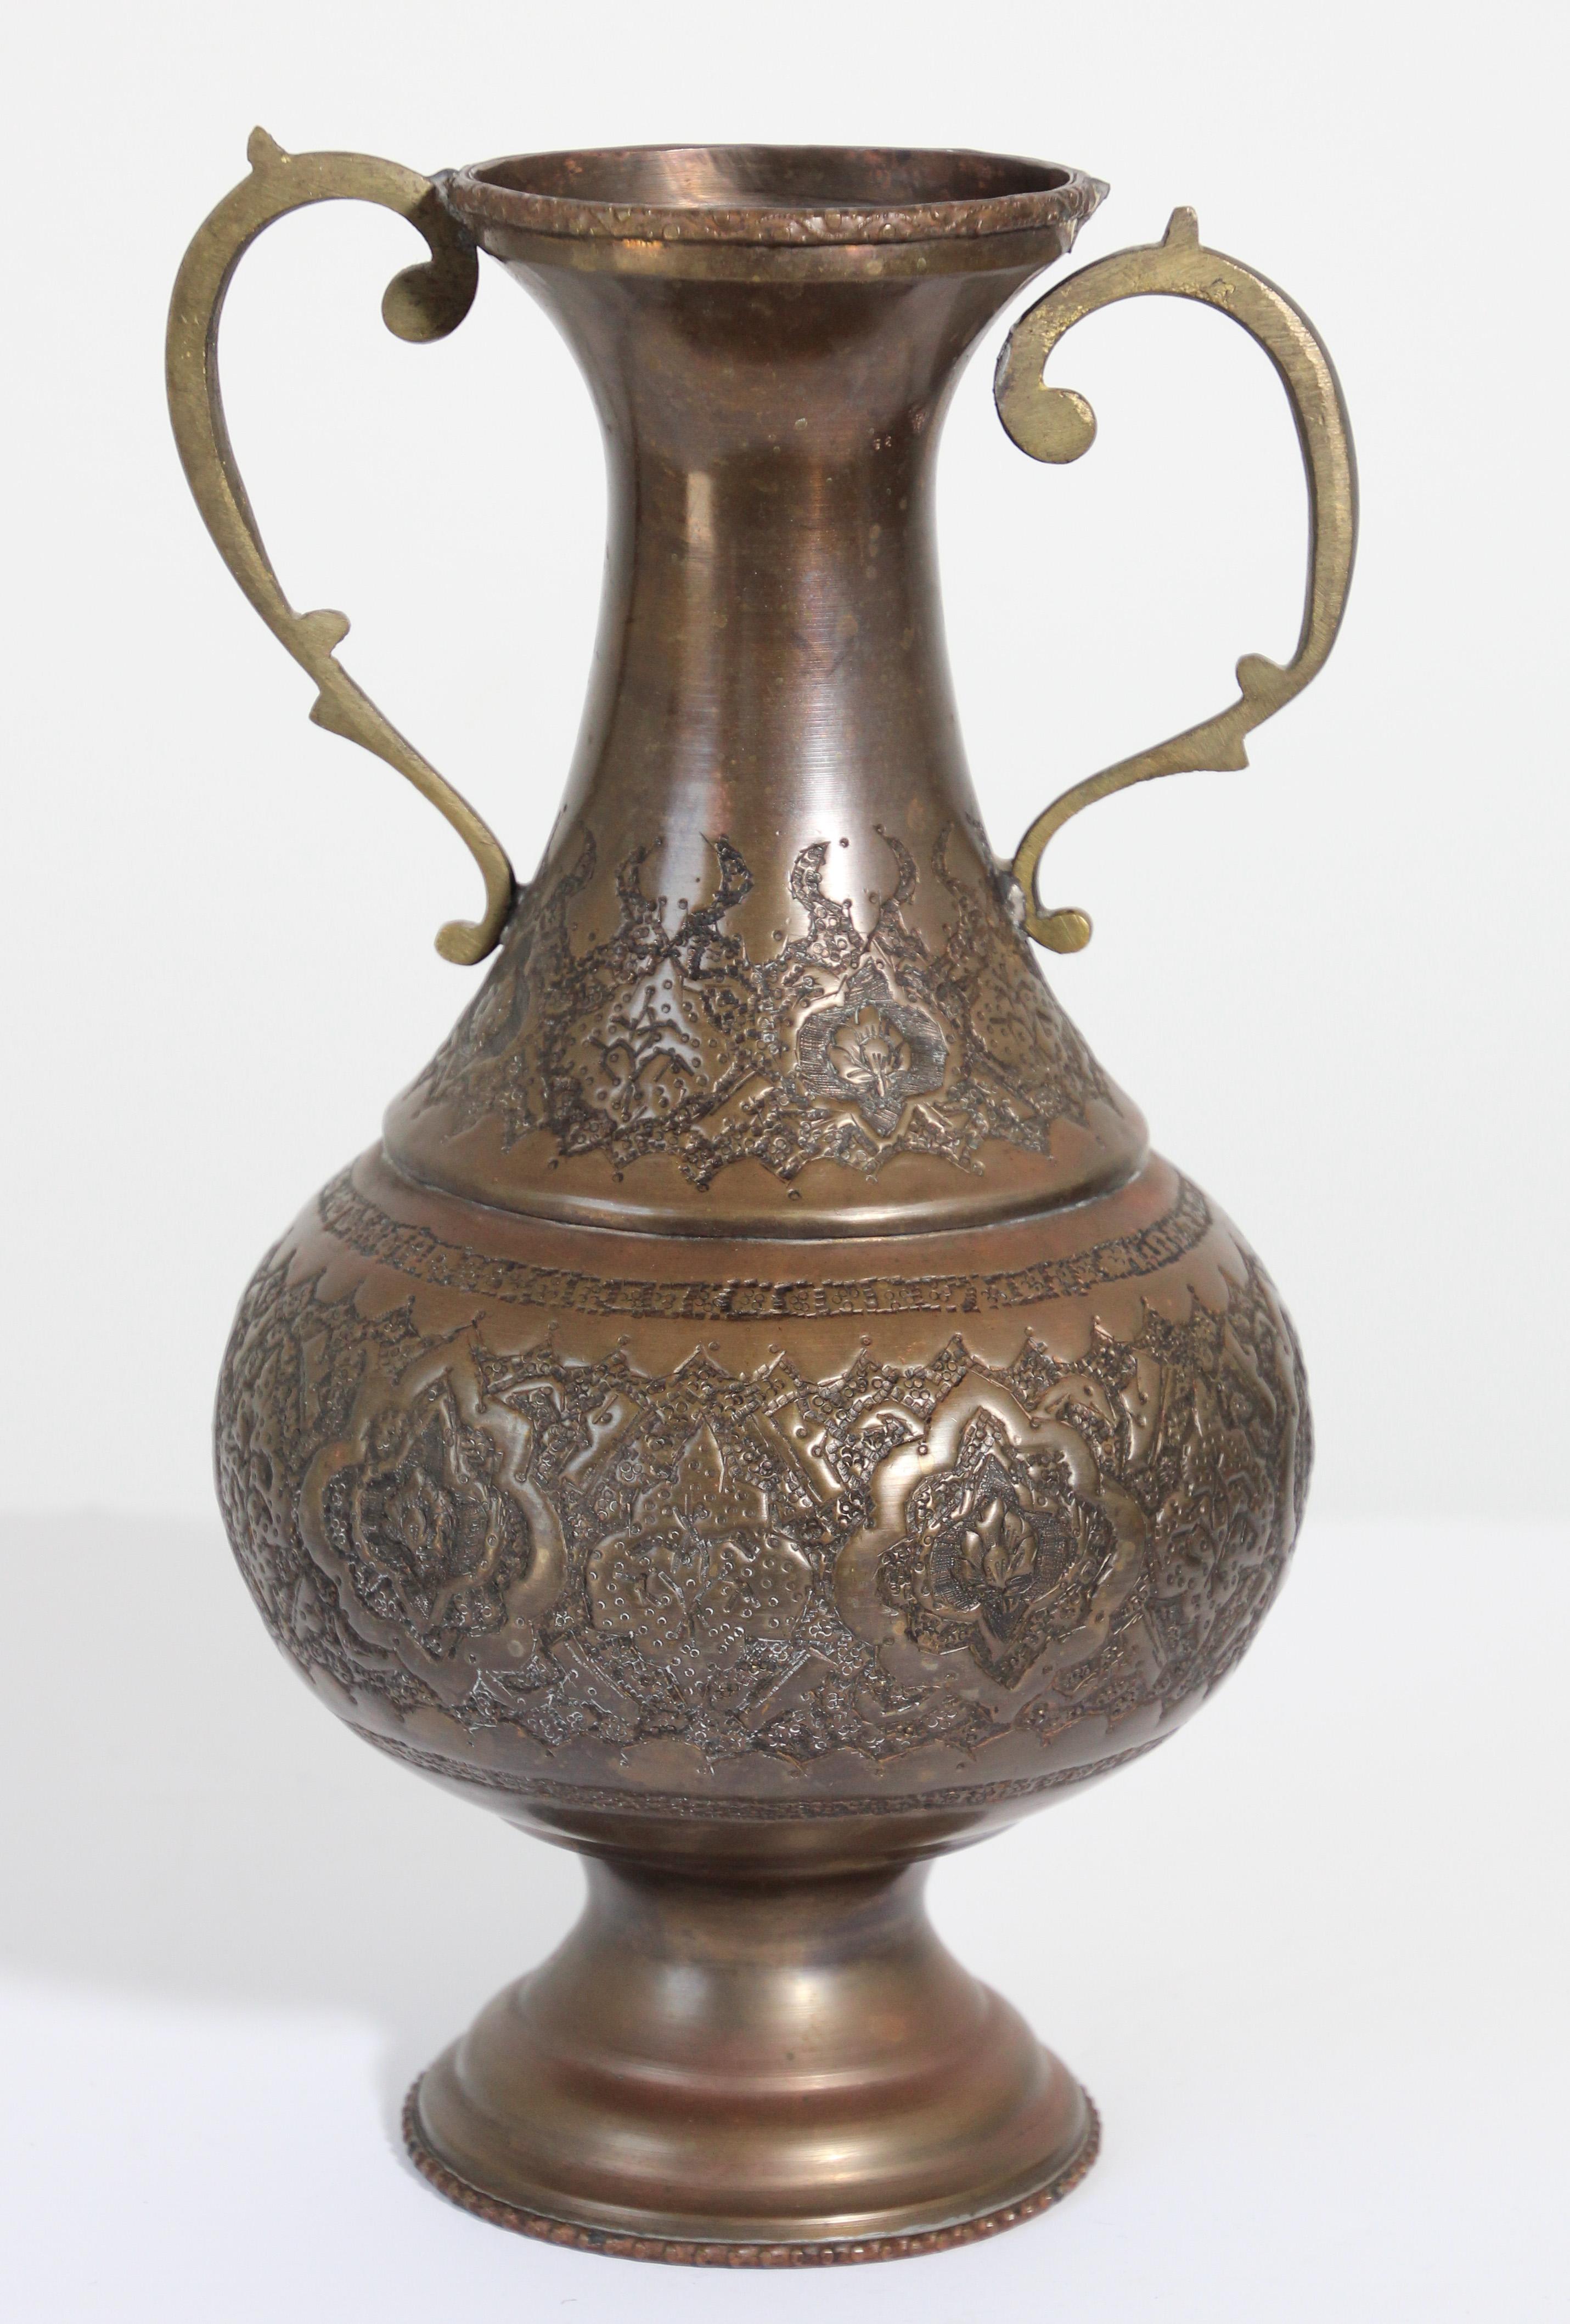 Middle Eastern Turkish copper vase, urn with traditional Islamic Moorish embossed design.
Handmade Islamic Moorish style engraved solid copper metal ware.
Footed vase with handle on each side.
One of the handle is detached, see pictures.